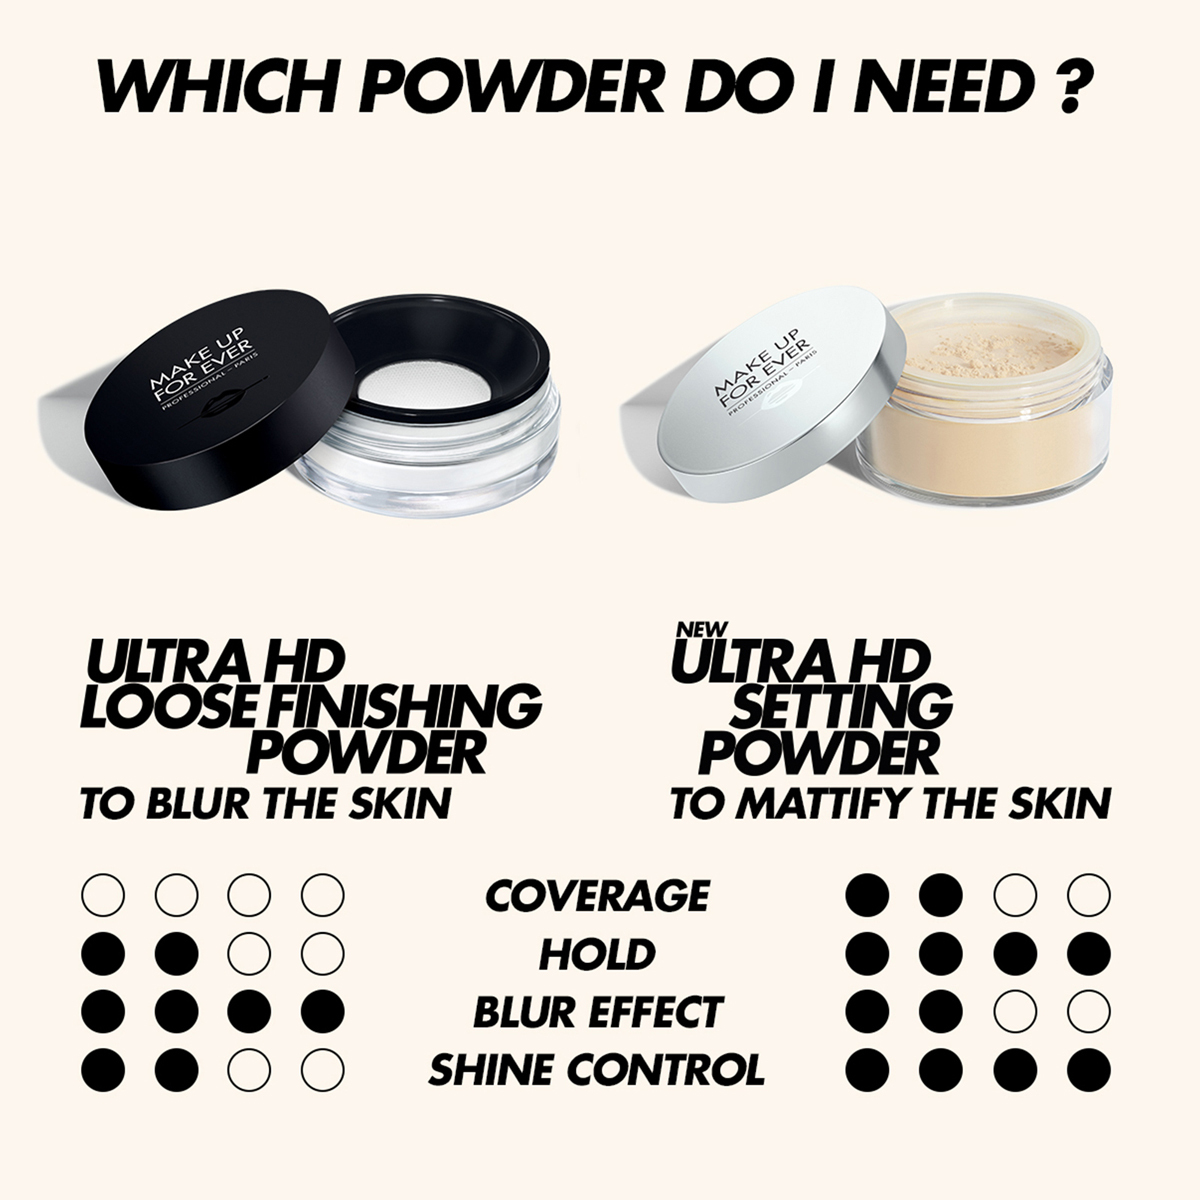 MAKE UP FOR EVER ULTRA HD SETTING POWDER-21 16G 2.2